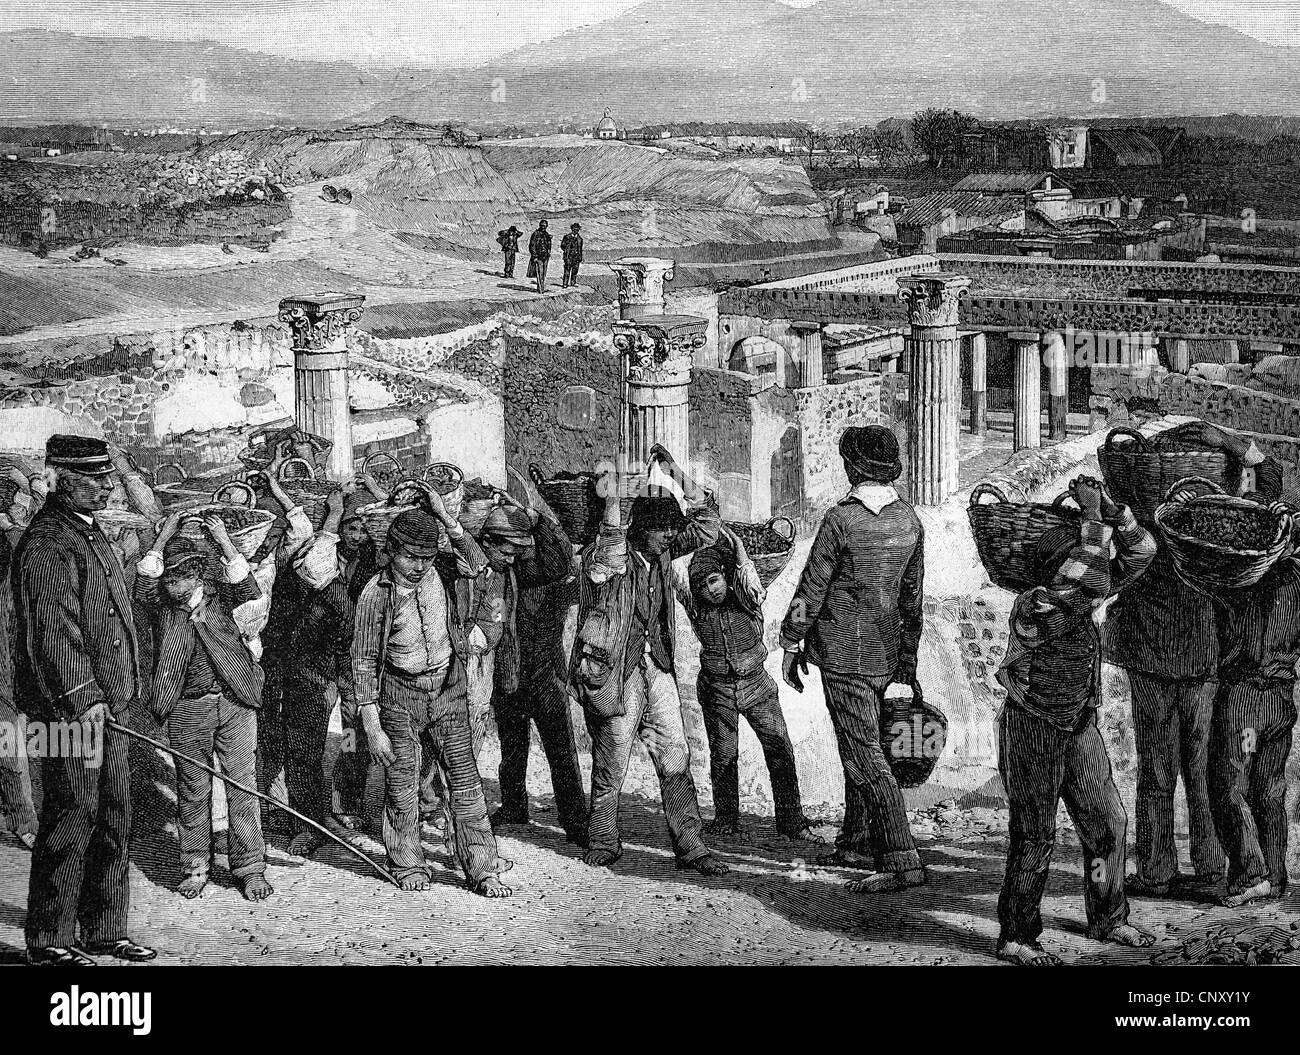 Excavations at Pompeii, Italy, in 1897, historic wood engraving, about 1897 Stock Photo